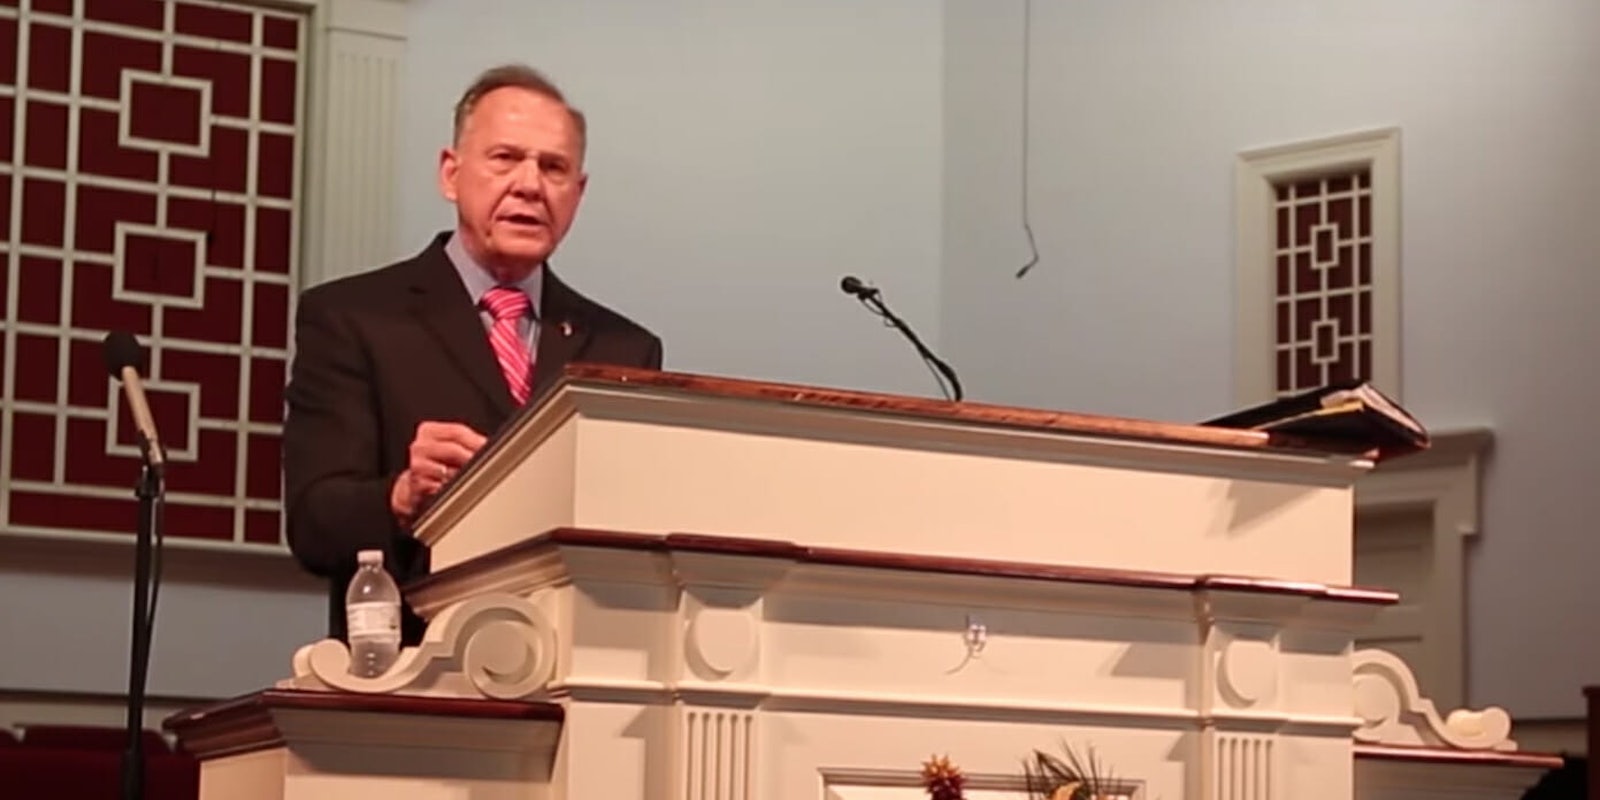 Roy Moore blamed a 'conspiracy' of liberals and LGBTQ people for allegations of sexual misconduct against him.